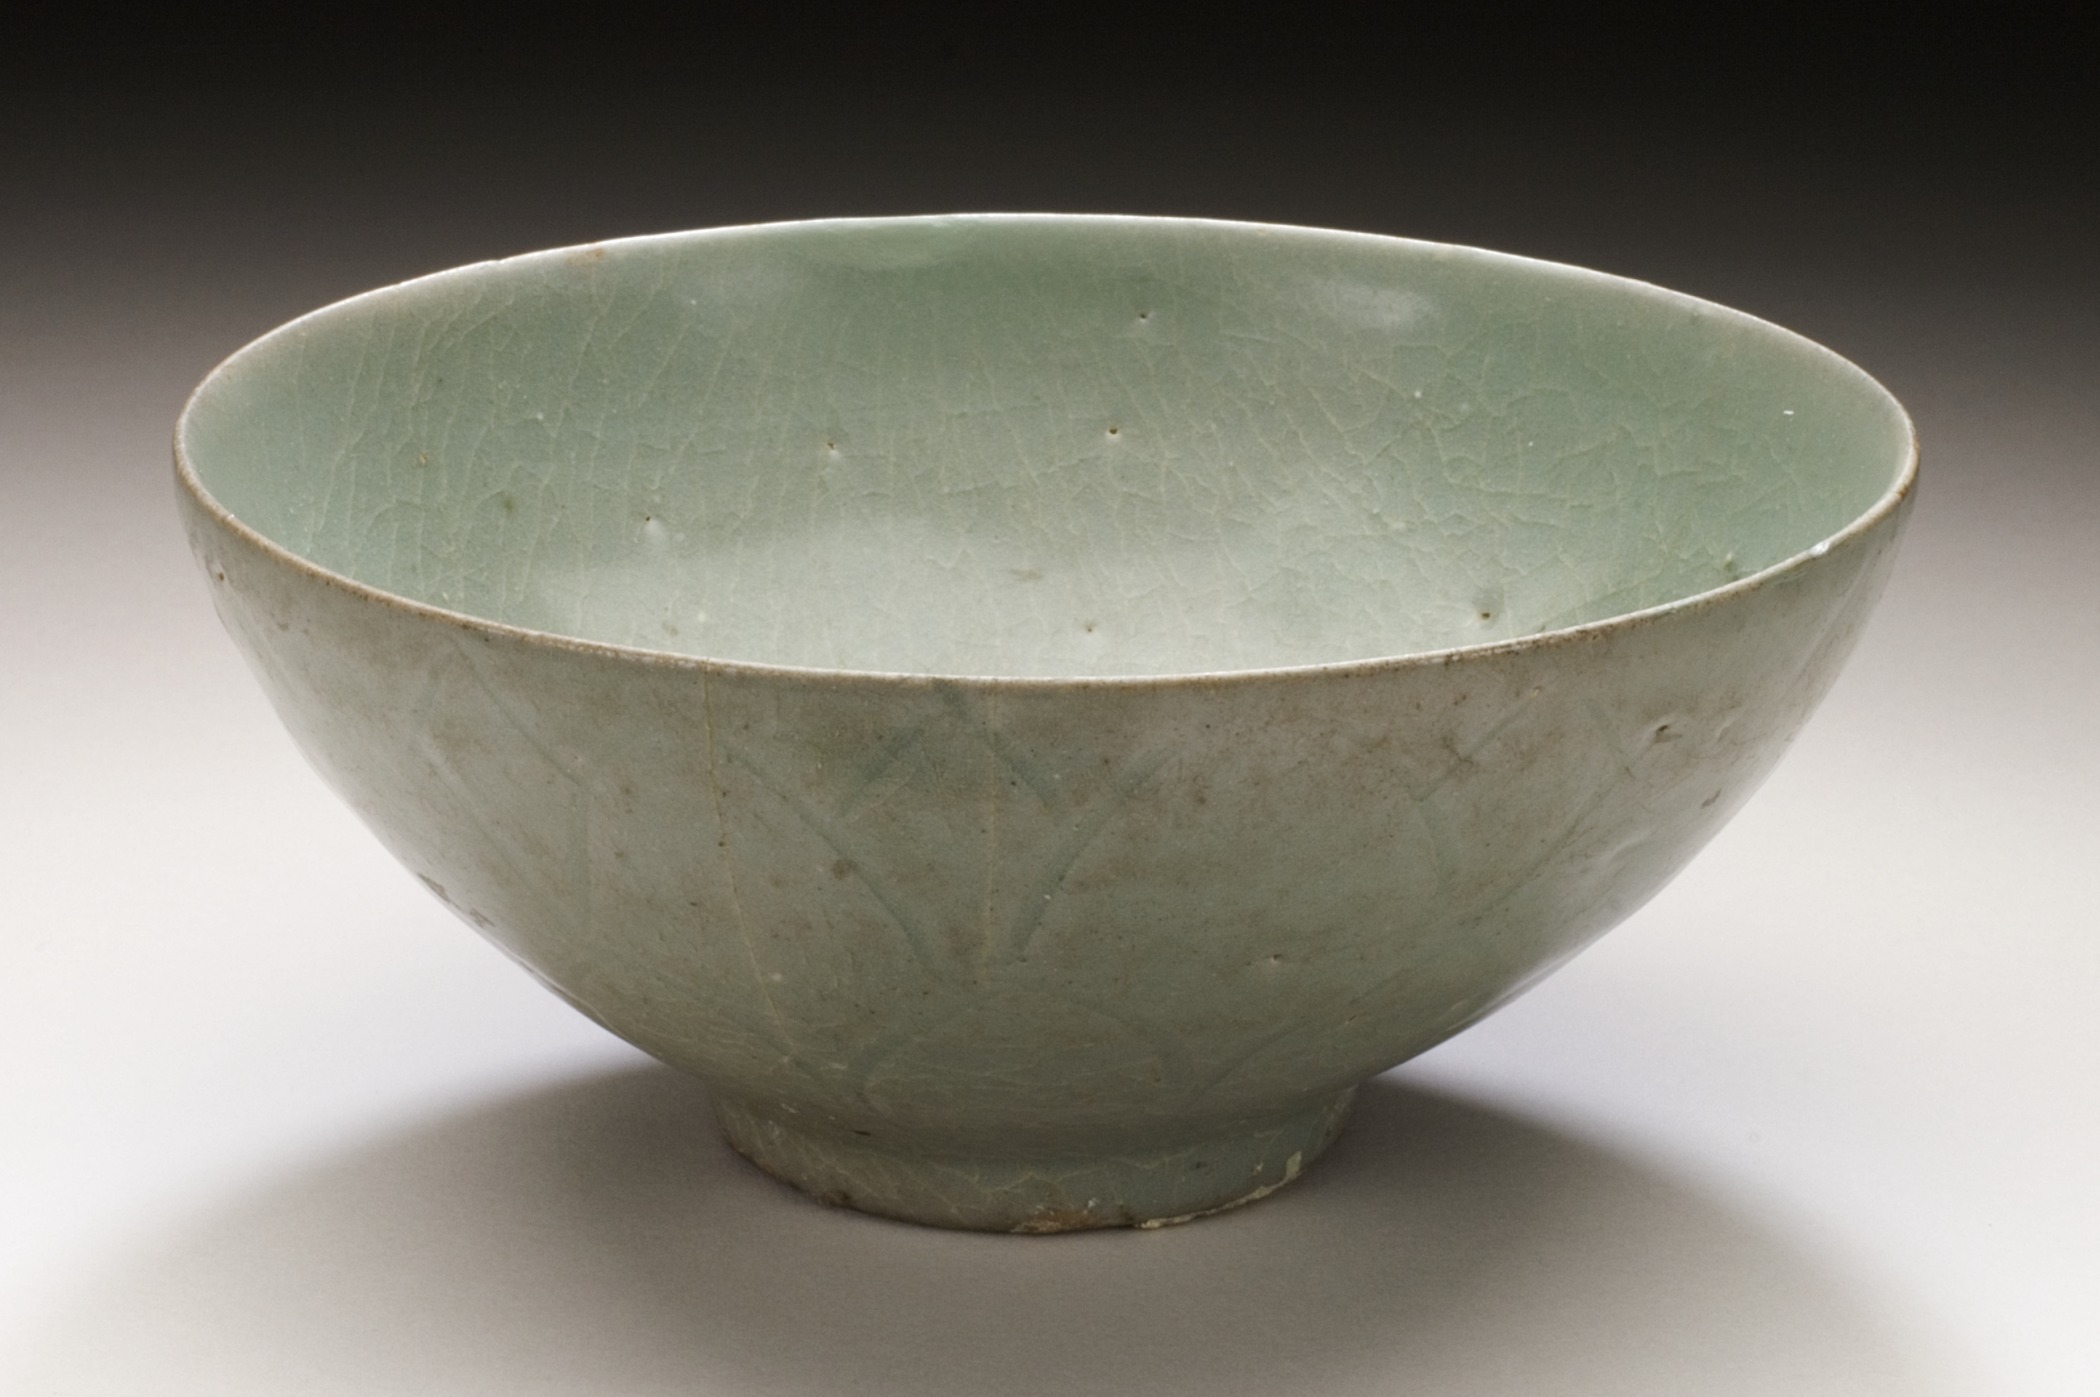 an oval shaped ceramic bowl with a thin top